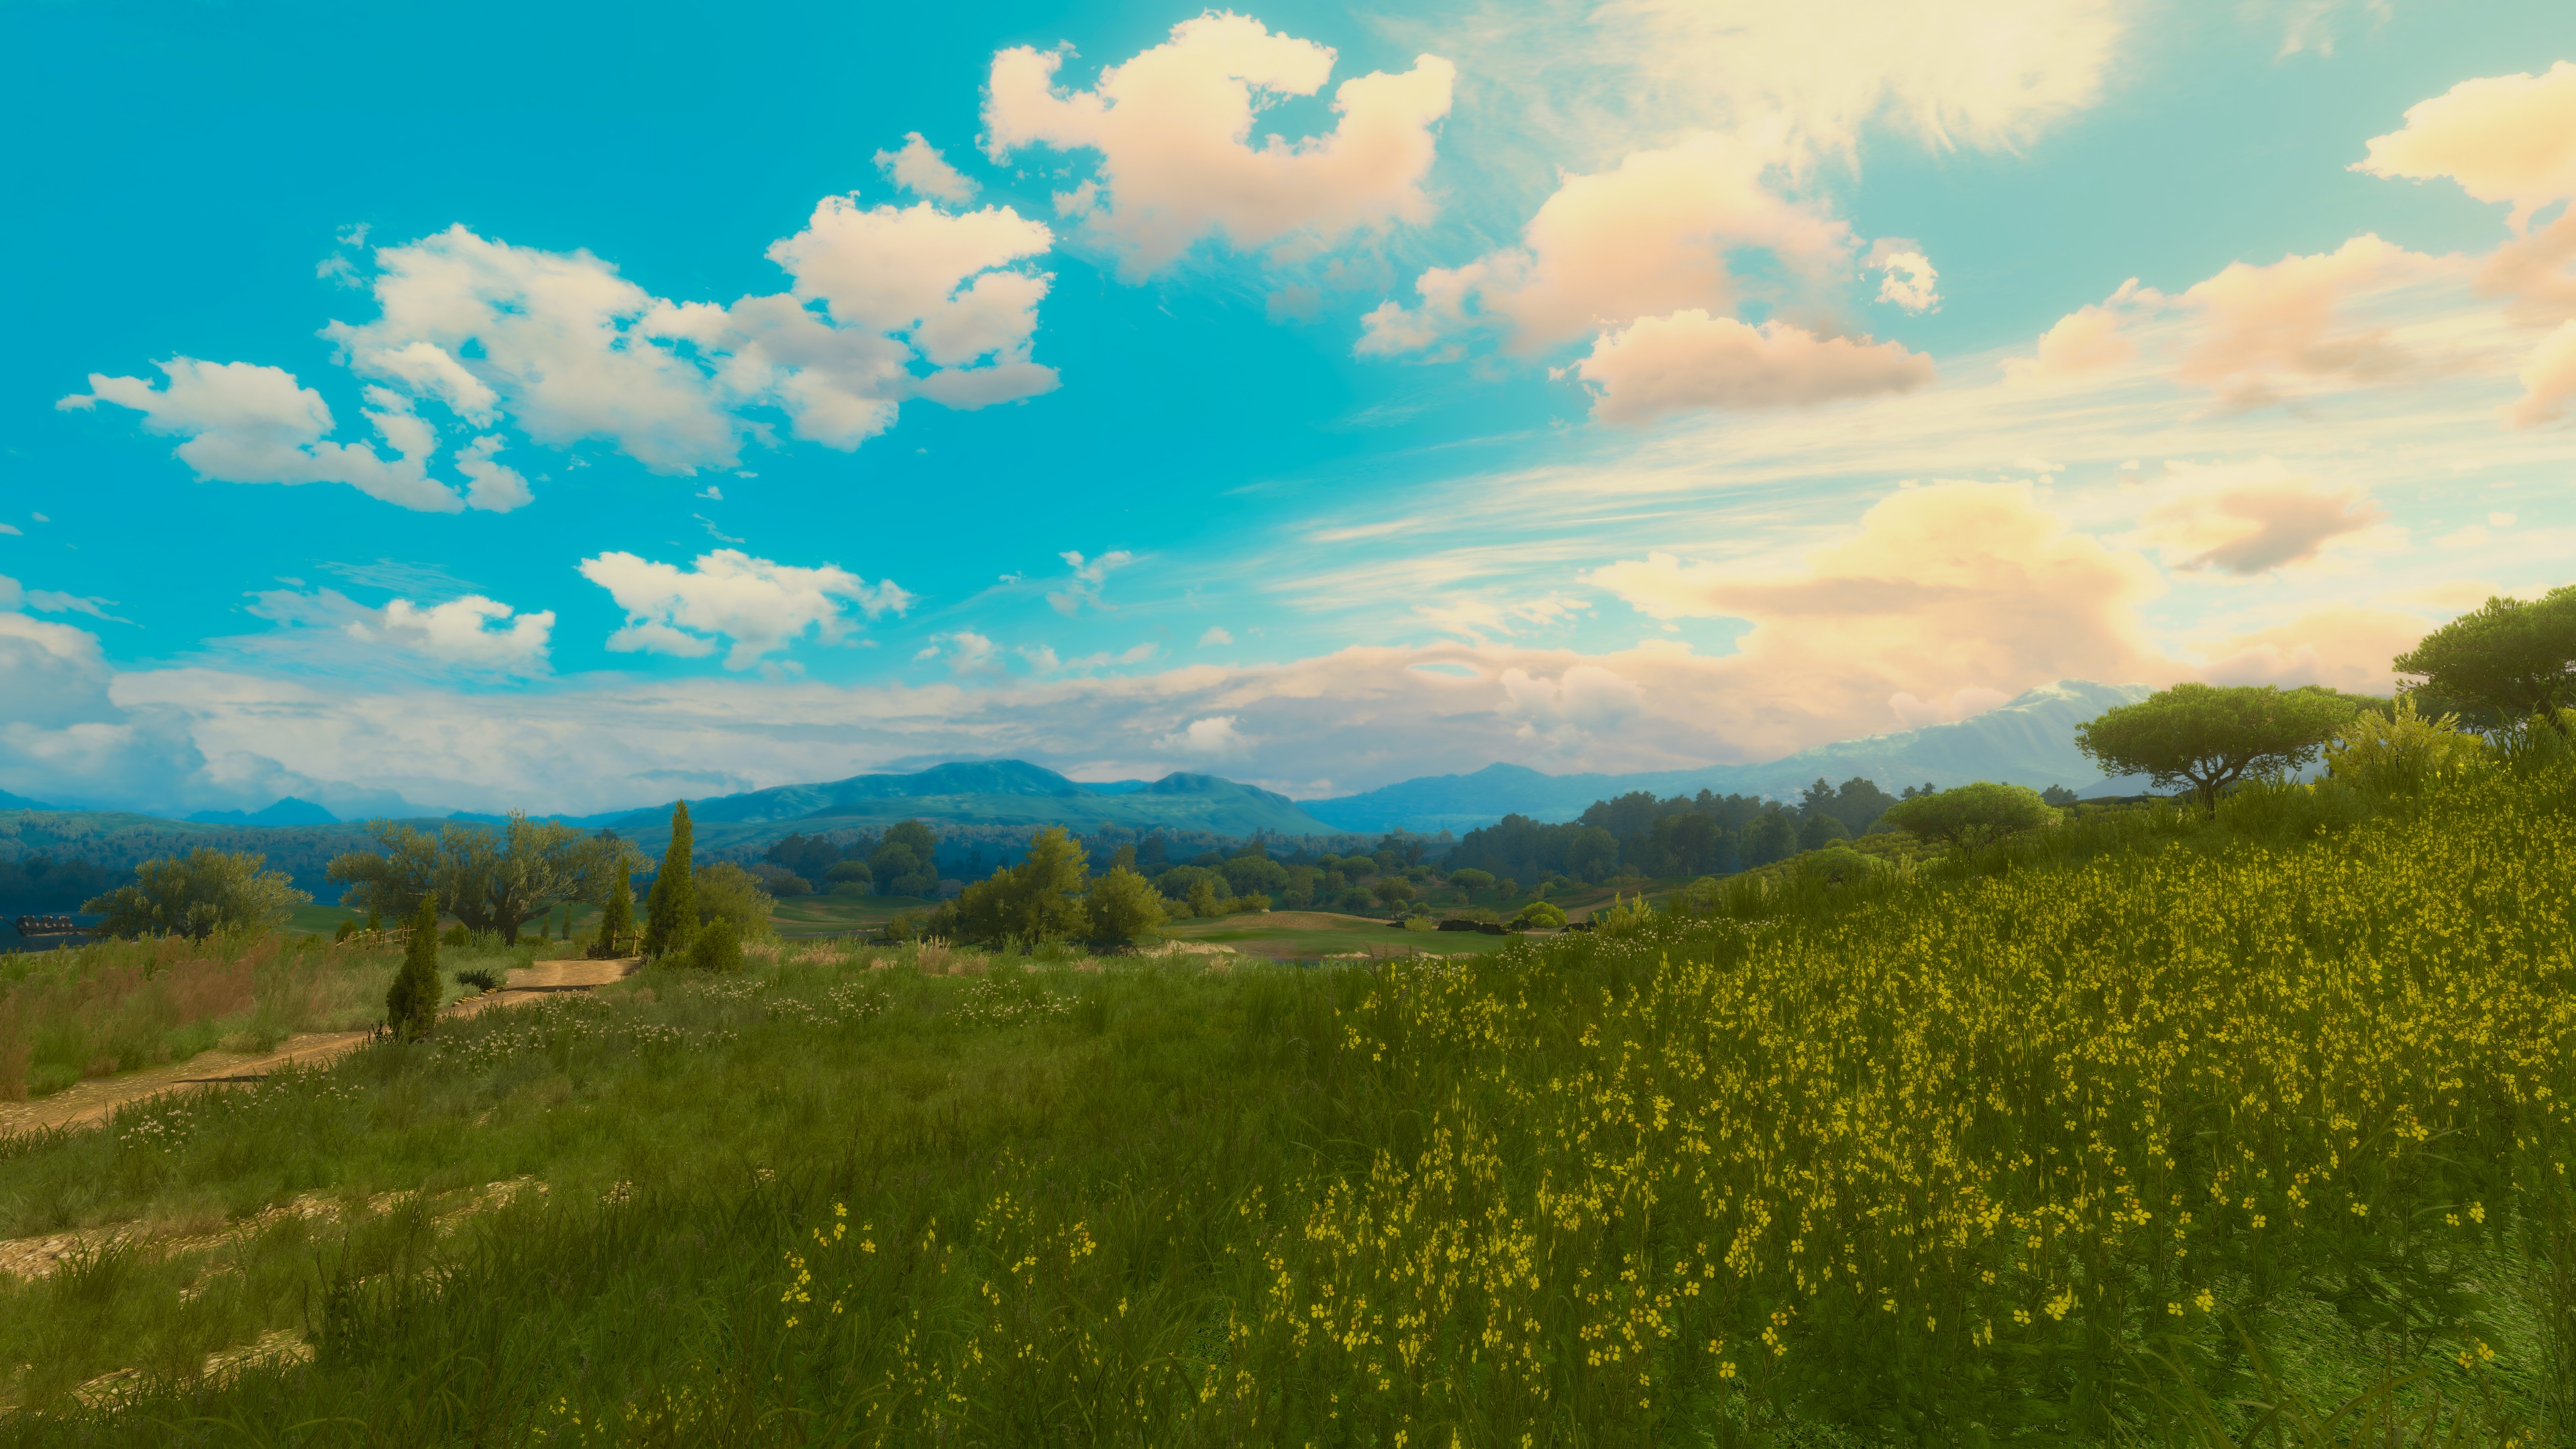 General 3840x2160 The Witcher 3: Wild Hunt screen shot PC gaming tussent video games video game art digital art landscape sunlight sky trees clouds nature forest CGI flowers